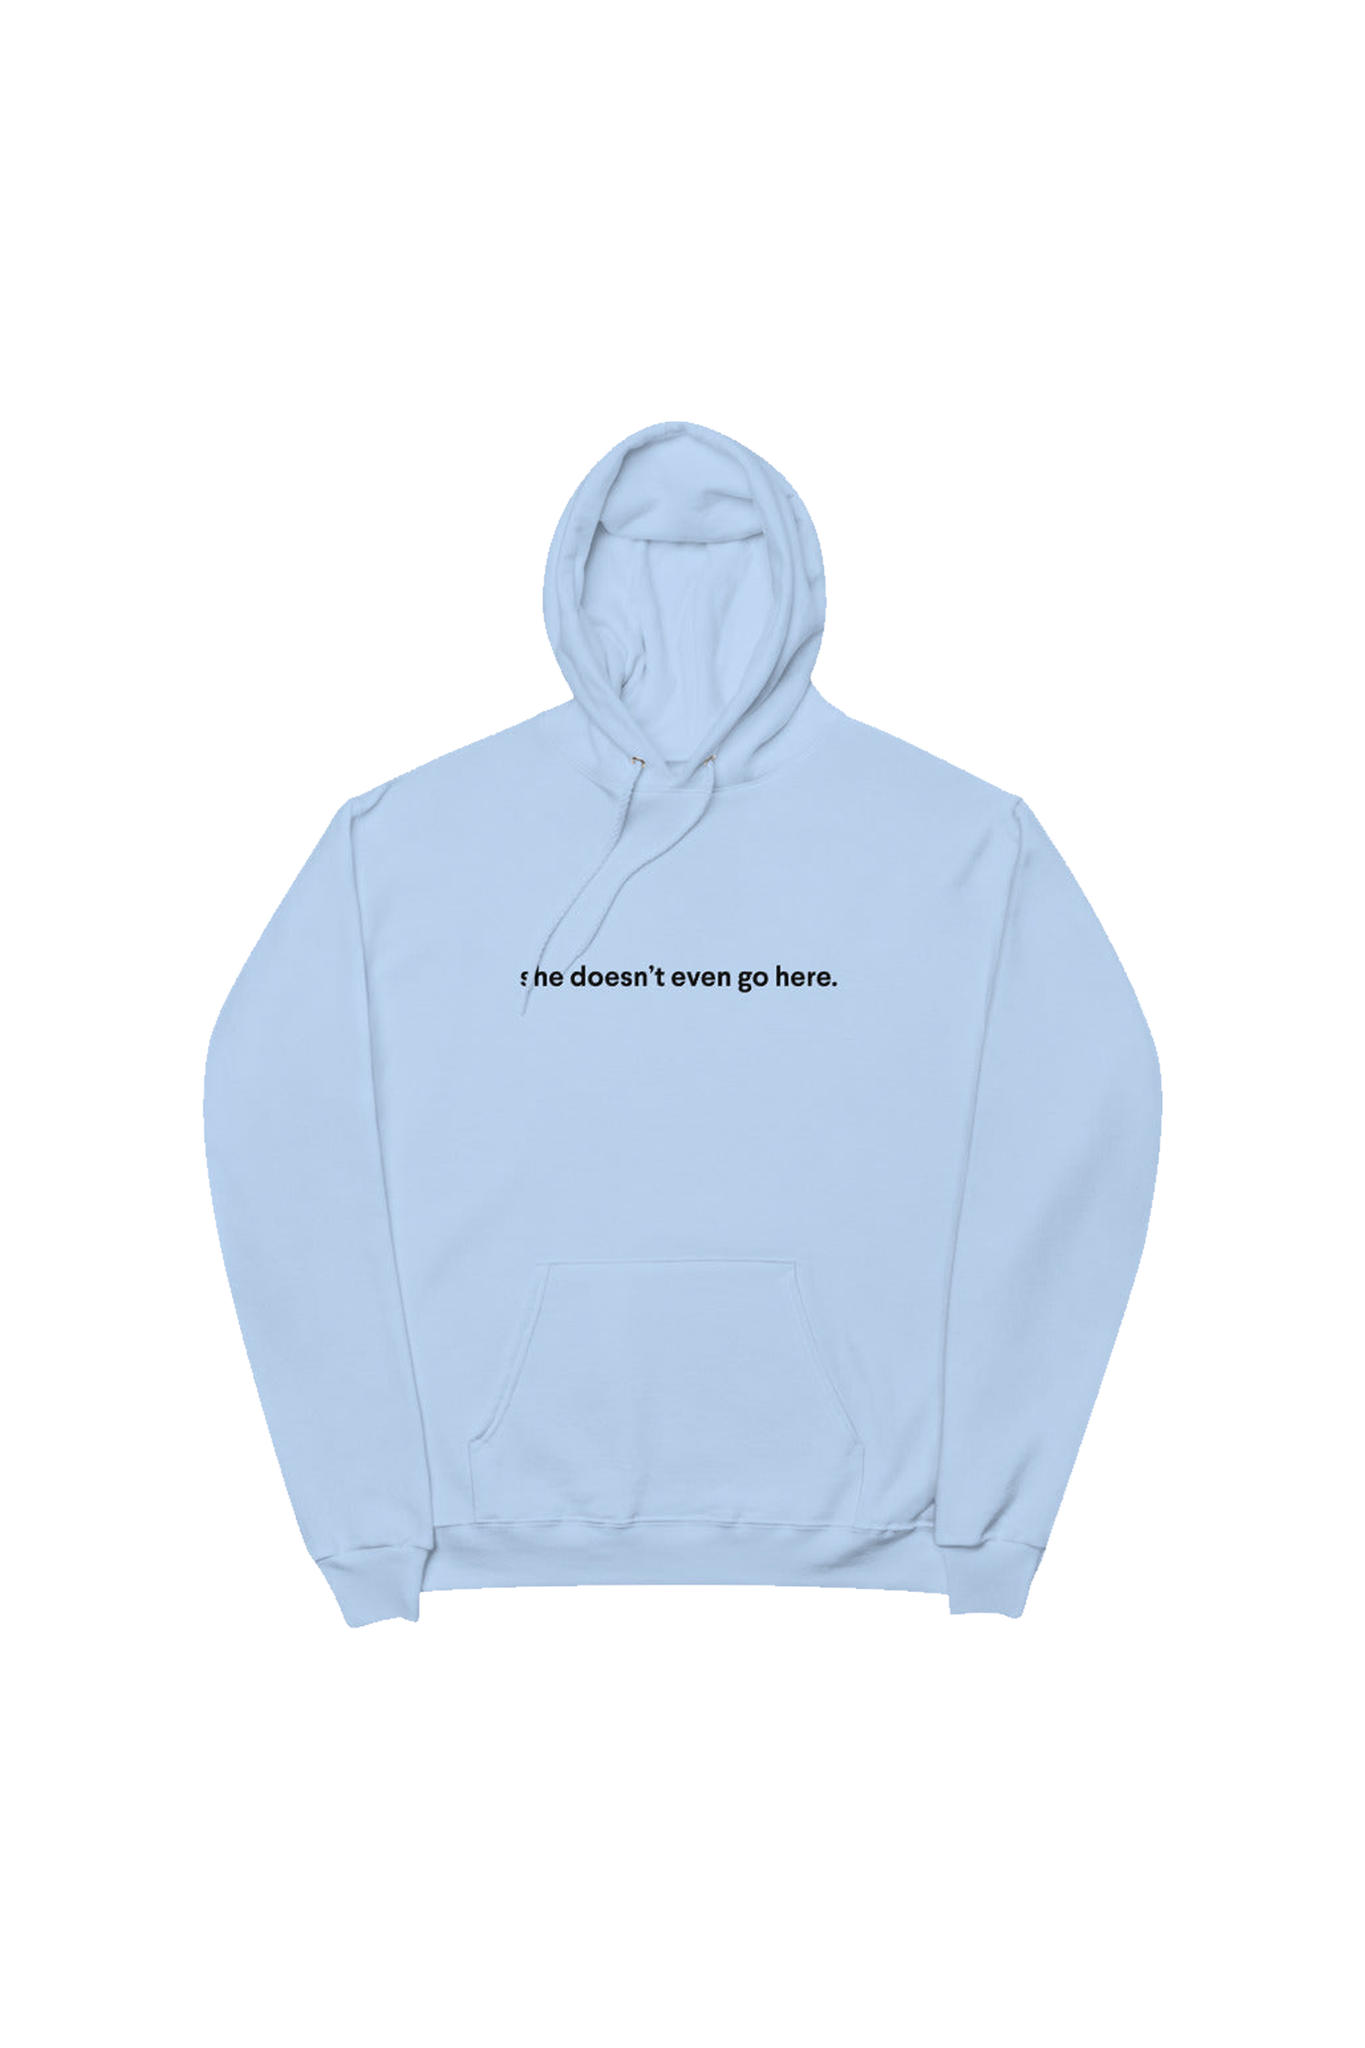 Doesn't Even Go Here Hoodie